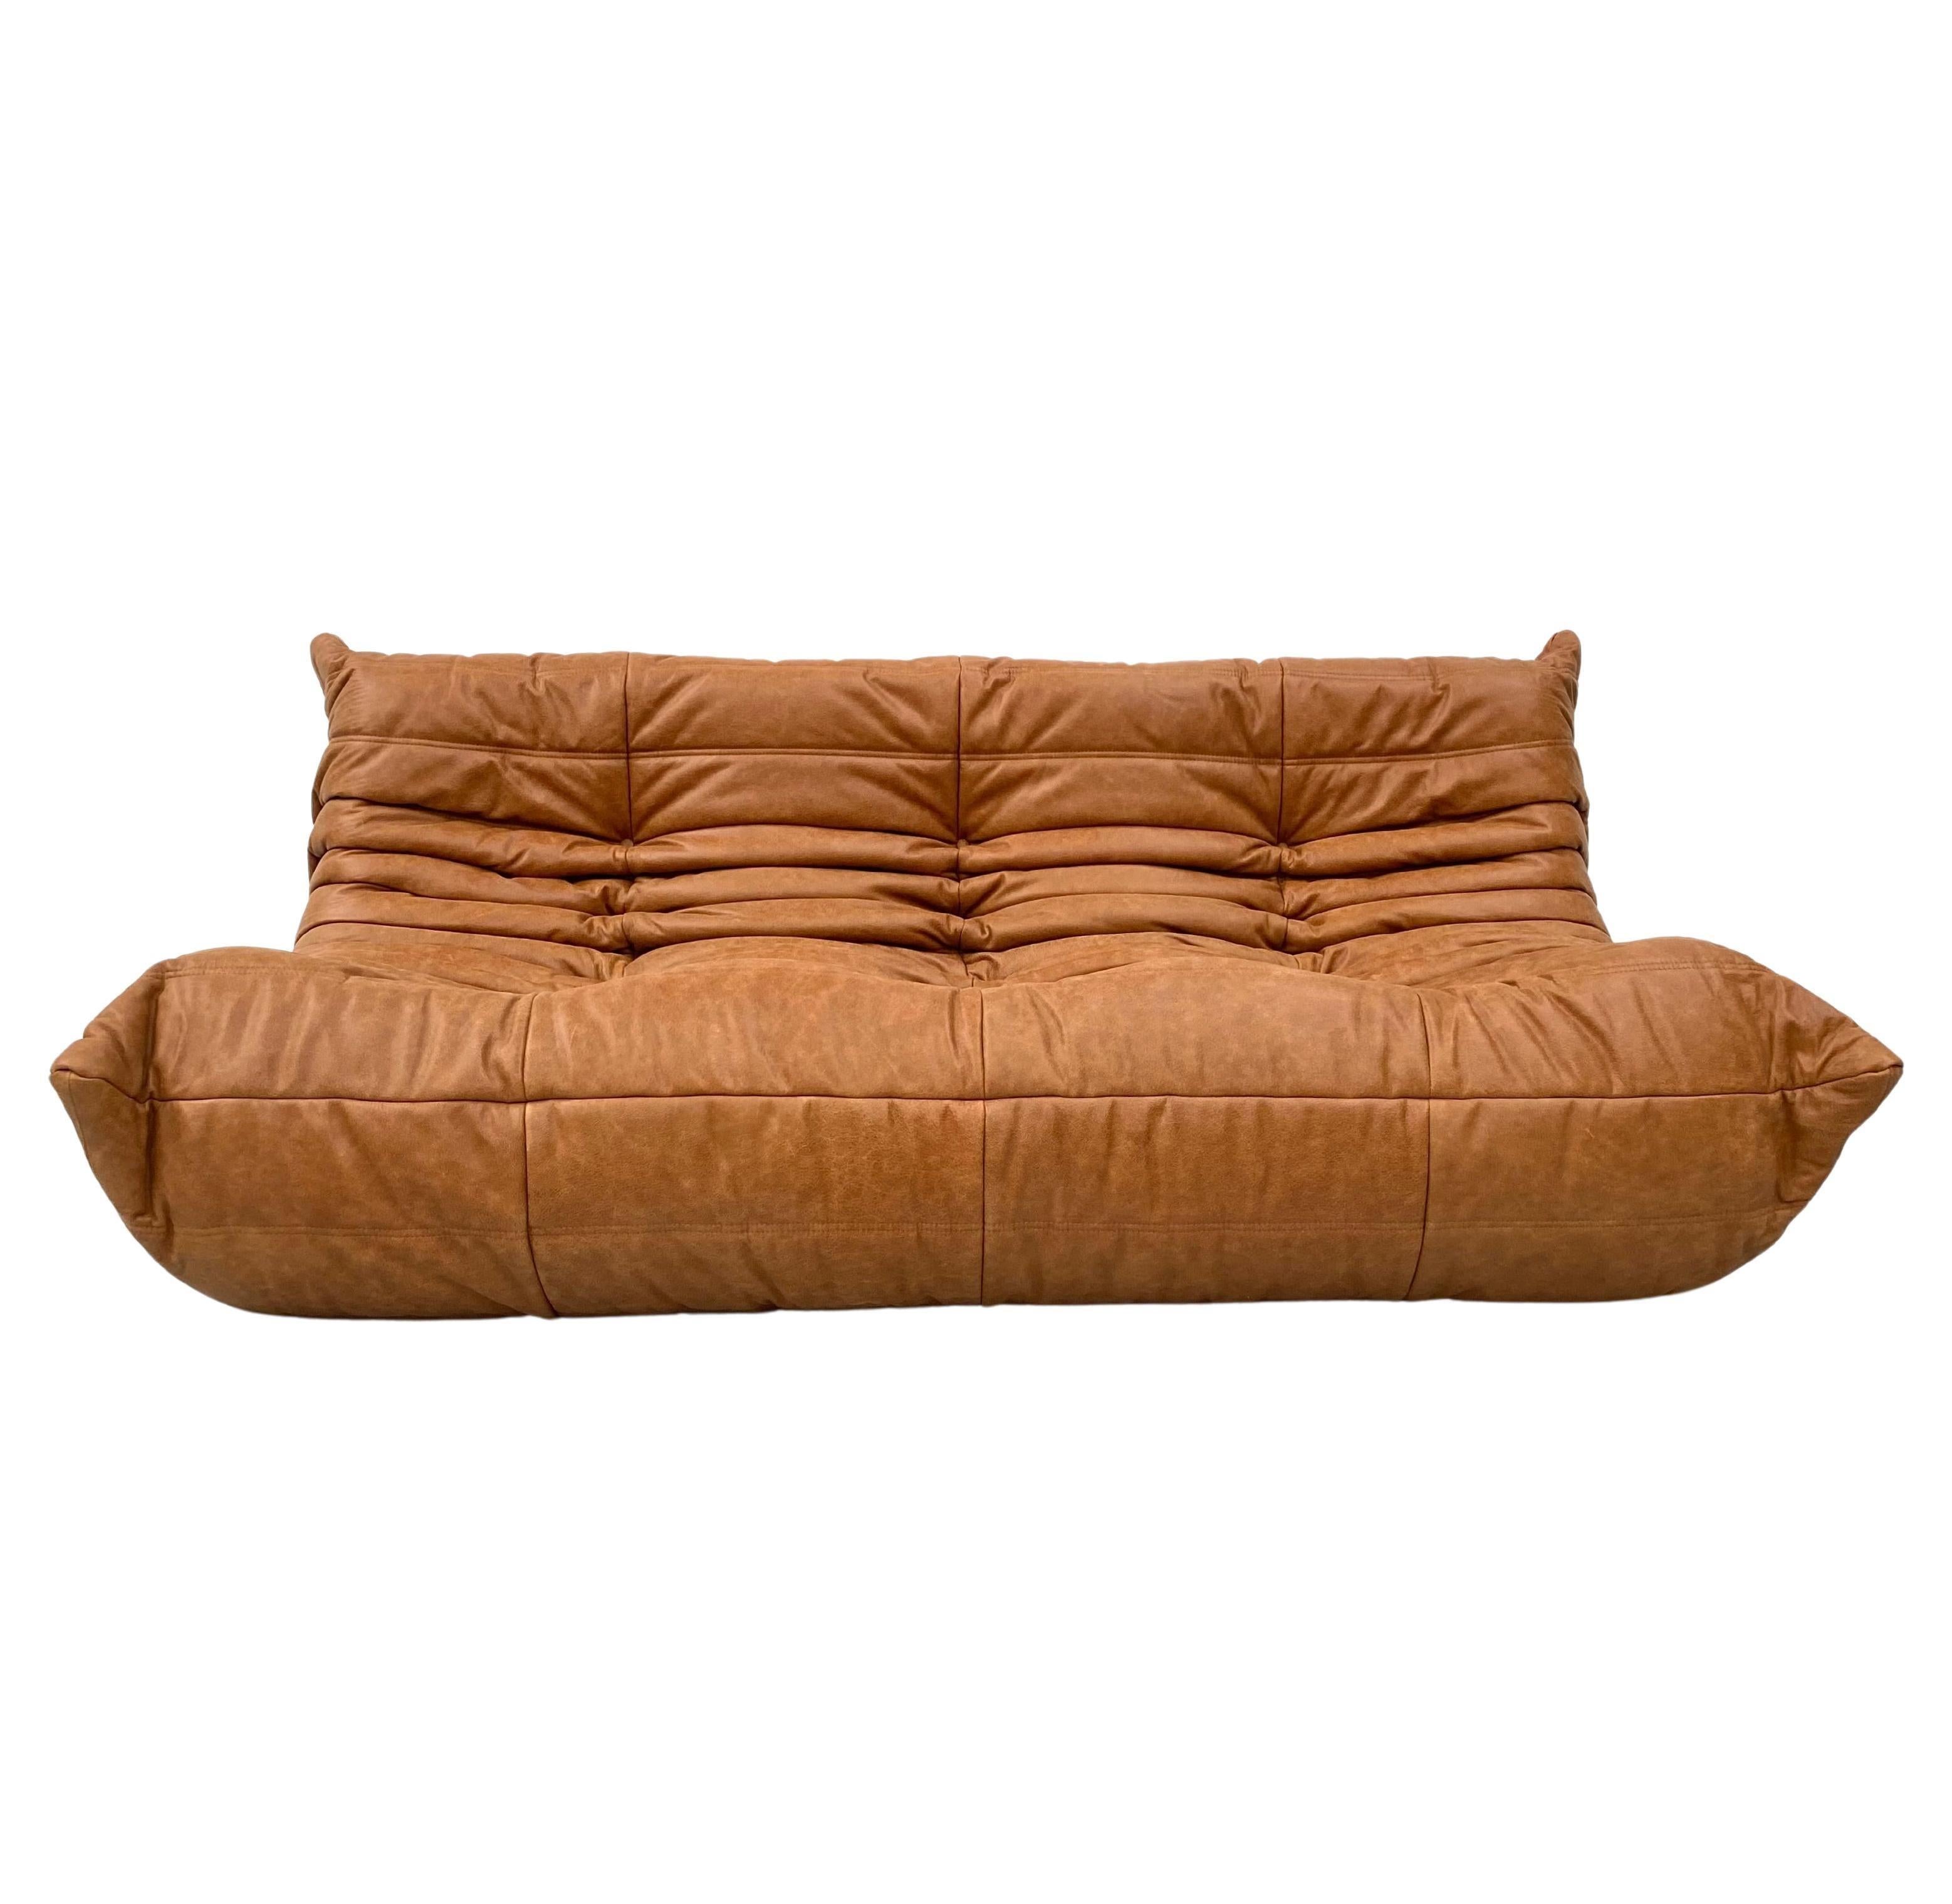 French Vintage Togo Sofa in Cognac Leather by Michel Ducaroy for Ligne Roset 2